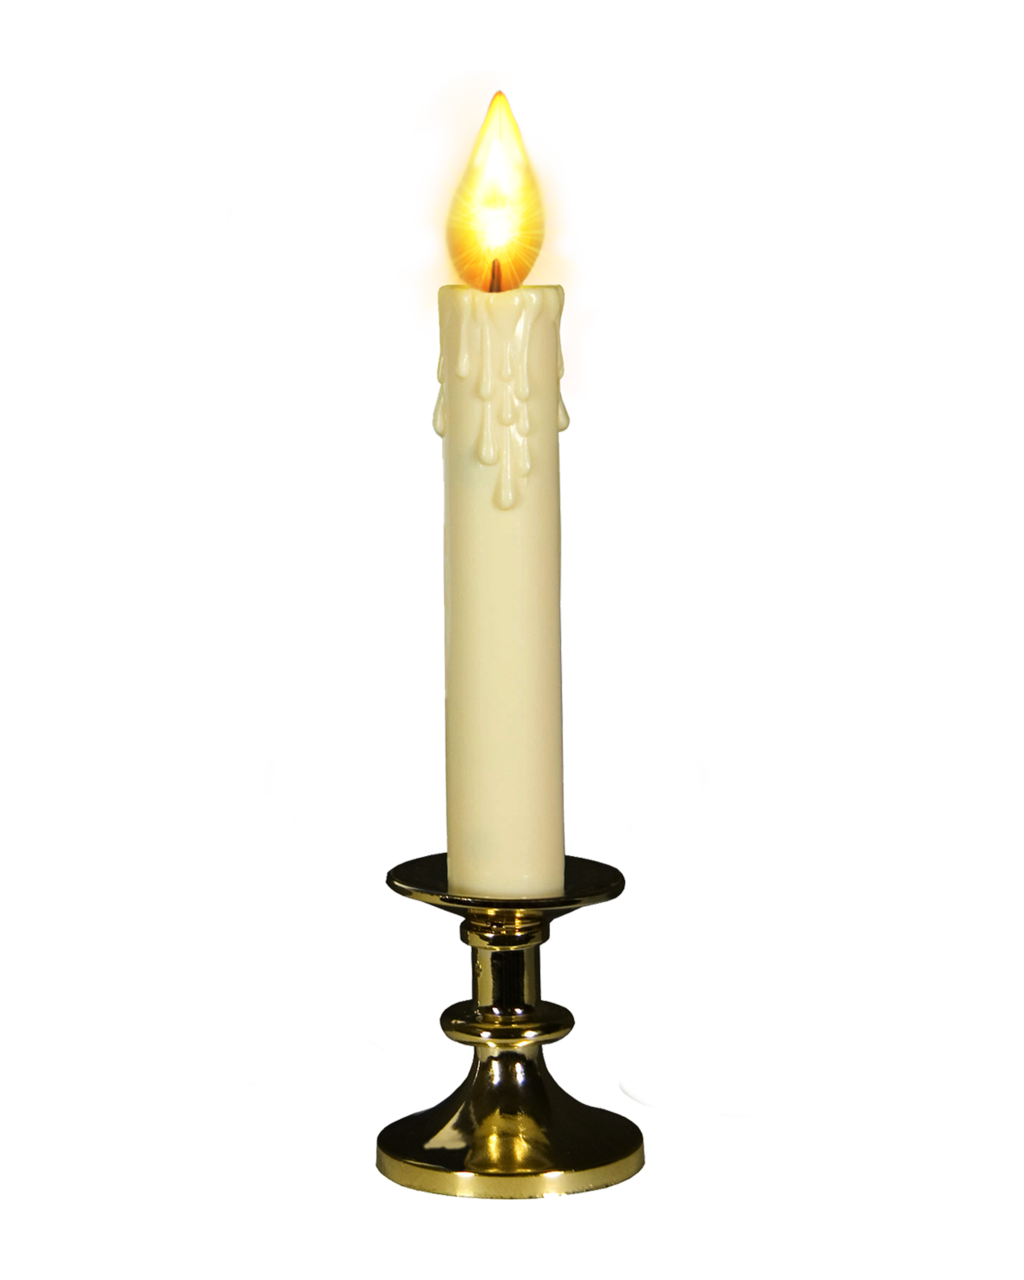 Png Candle By Moonglowlilly Png Candle By Moonglowlilly - Candle, Transparent background PNG HD thumbnail